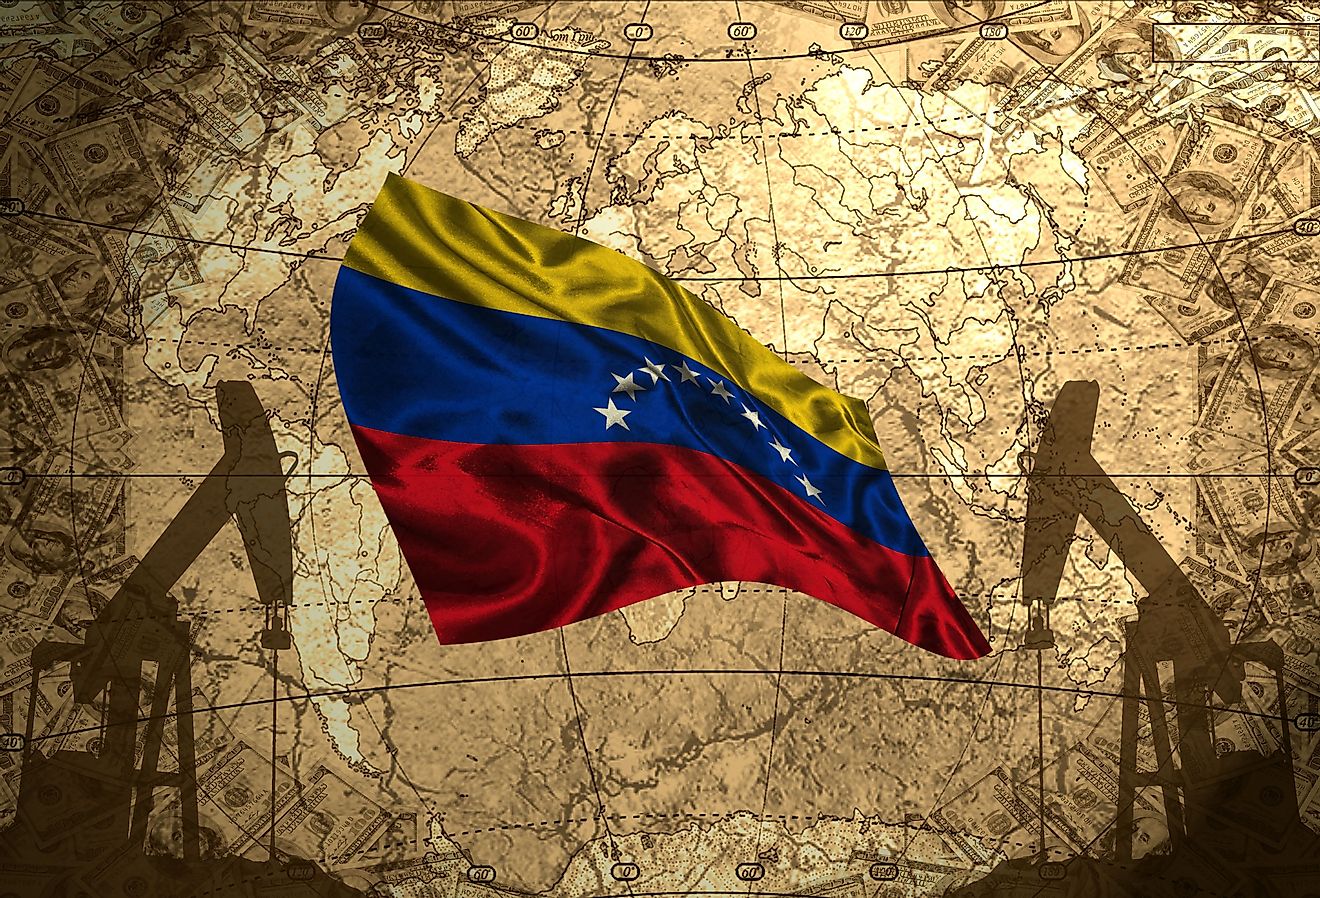 Venezuela has the most oil reserves in the world with 300 billion barrels of proven oil reserves in 2021. Image credit esfera via Shutterstock